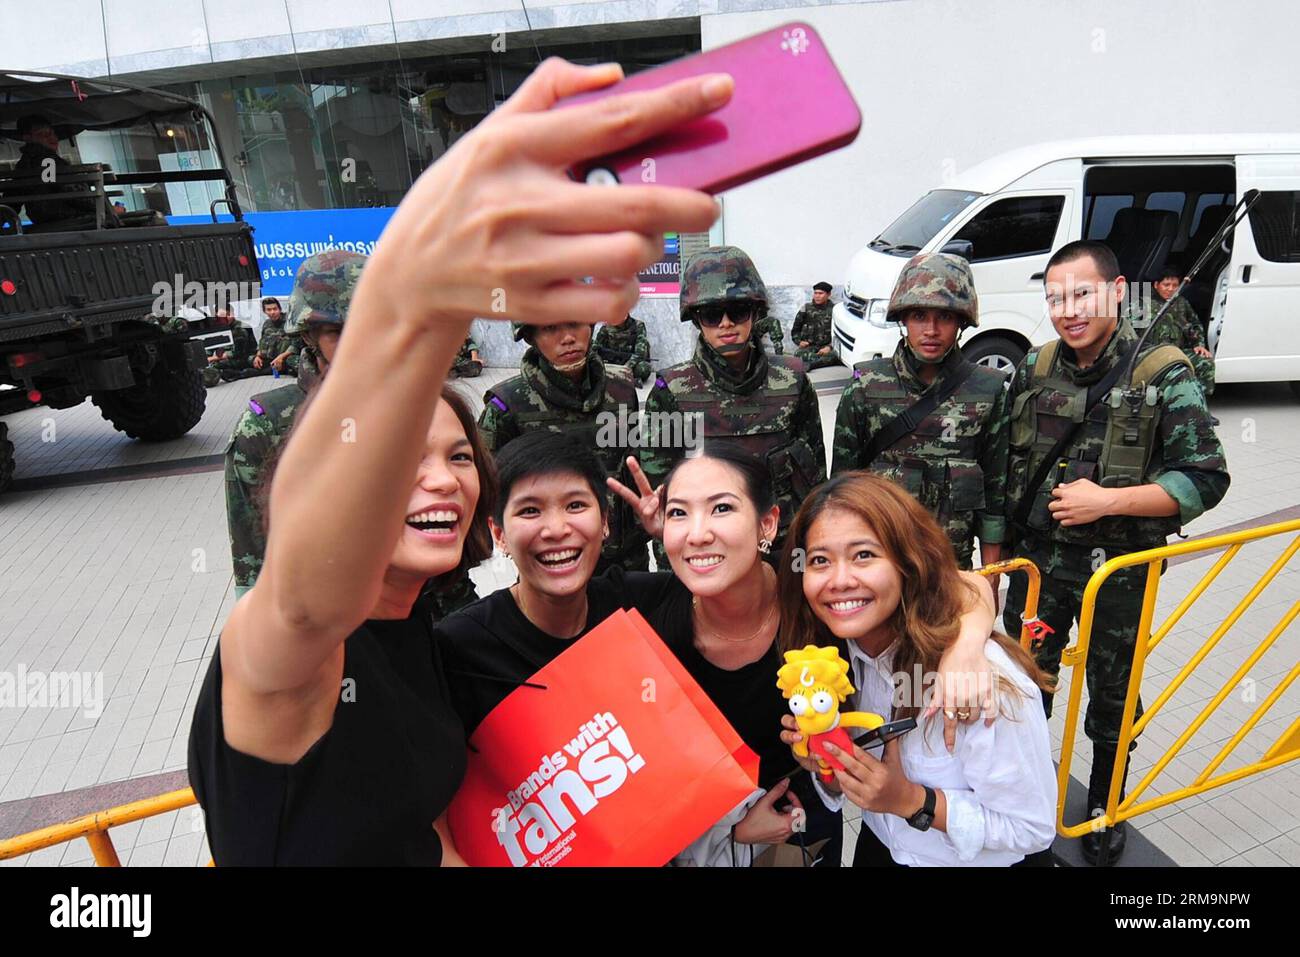 (140528) -- BANGKOK, May 28, 2014 (Xinhua) -- People take photos with Thai soldiers outside the Art Culture Center in Bangkok, Thailand, May 28, 2014. Thailand s coup was credit negative for Thailand s tourist sector for reasons including travel warnings against Thailand, the nationwide curfew as well as shortened operation hours of department stores and public transport. (Xinhua/Rachen Sageamsak) (zjy) THAILAND-BANGKOK-COUP PUBLICATIONxNOTxINxCHN   Bangkok May 28 2014 XINHUA Celebrities Take Photos With Thai Soldiers outside The Art Culture Center in Bangkok Thai country May 28 2014 Thai coun Stock Photo